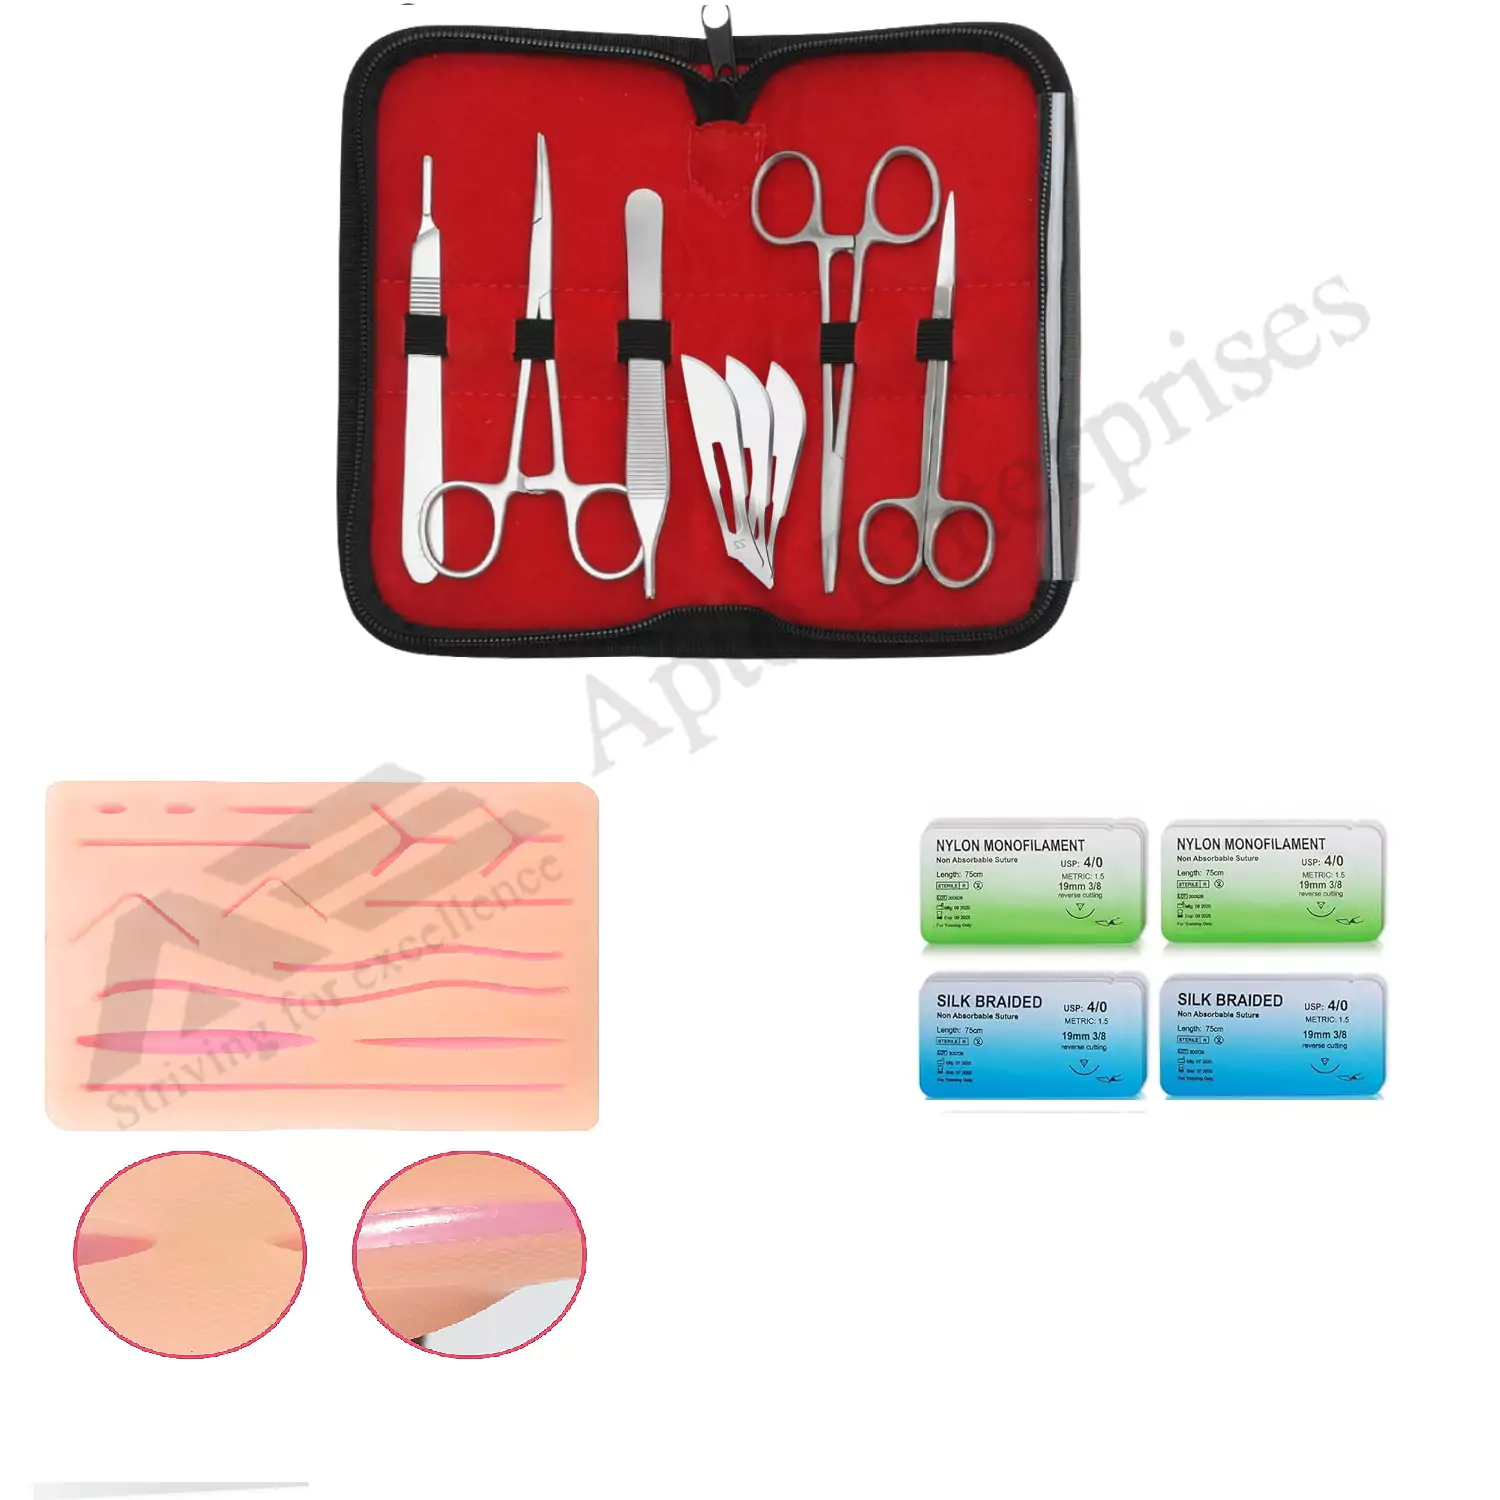 6. Essential Suture Education Kit with Mesh Reinforced Suture Pad